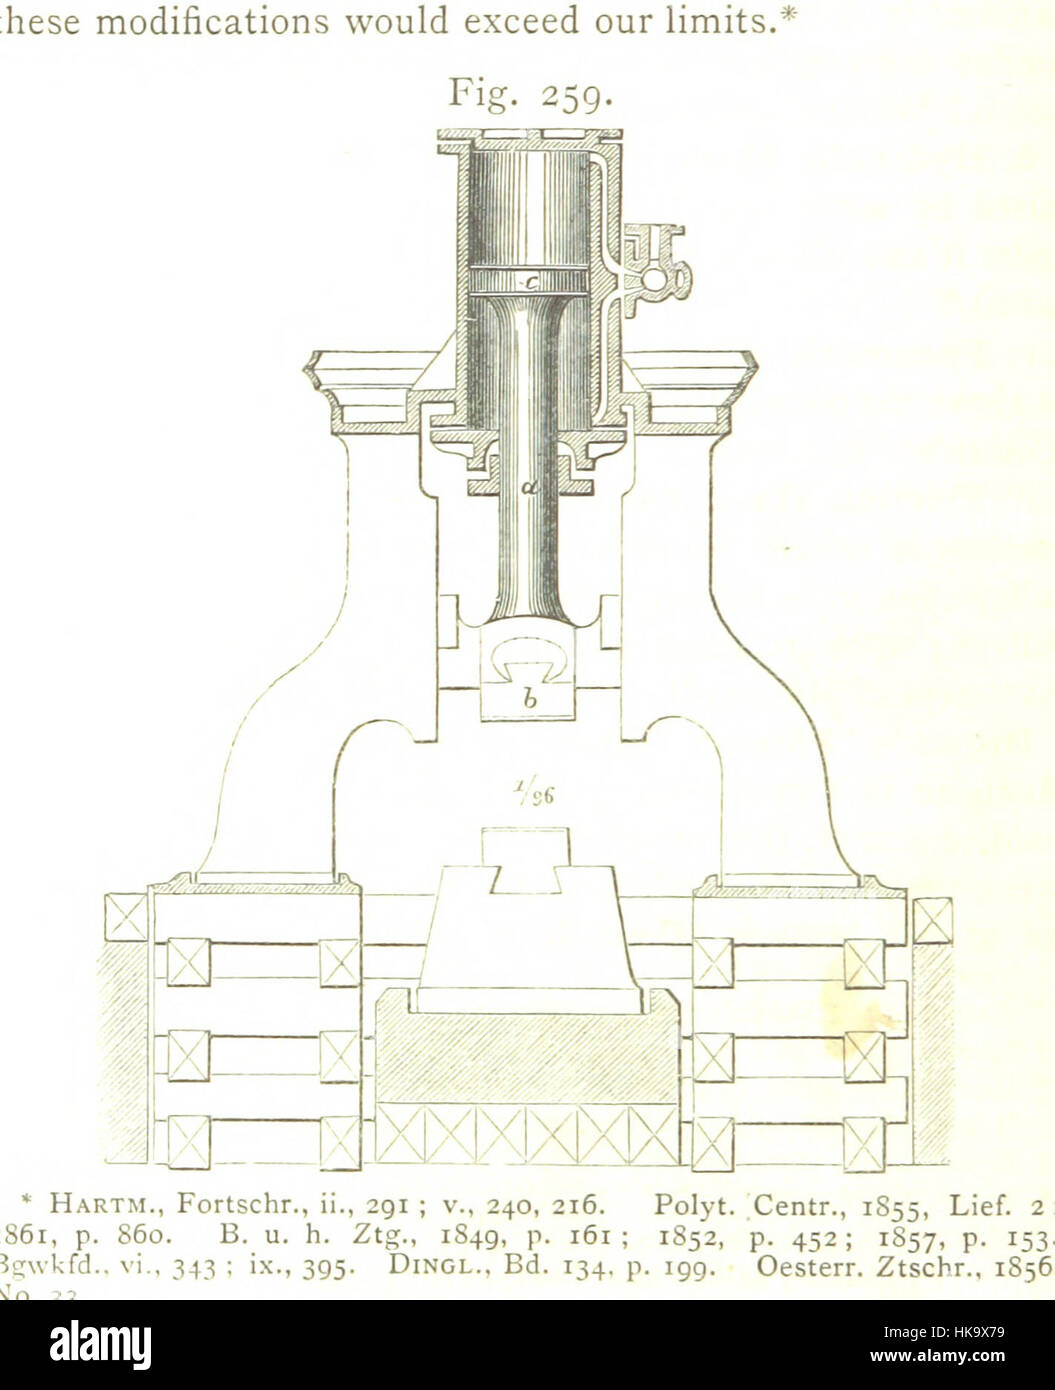 A practical Treatise on Metallurgy, adapted from the last German edition of Professor K.'s Metallurgy, by W. Crookes and E. Röhrig ... Illustrated, etc Image taken from page 850 of 'A practical Stock Photo